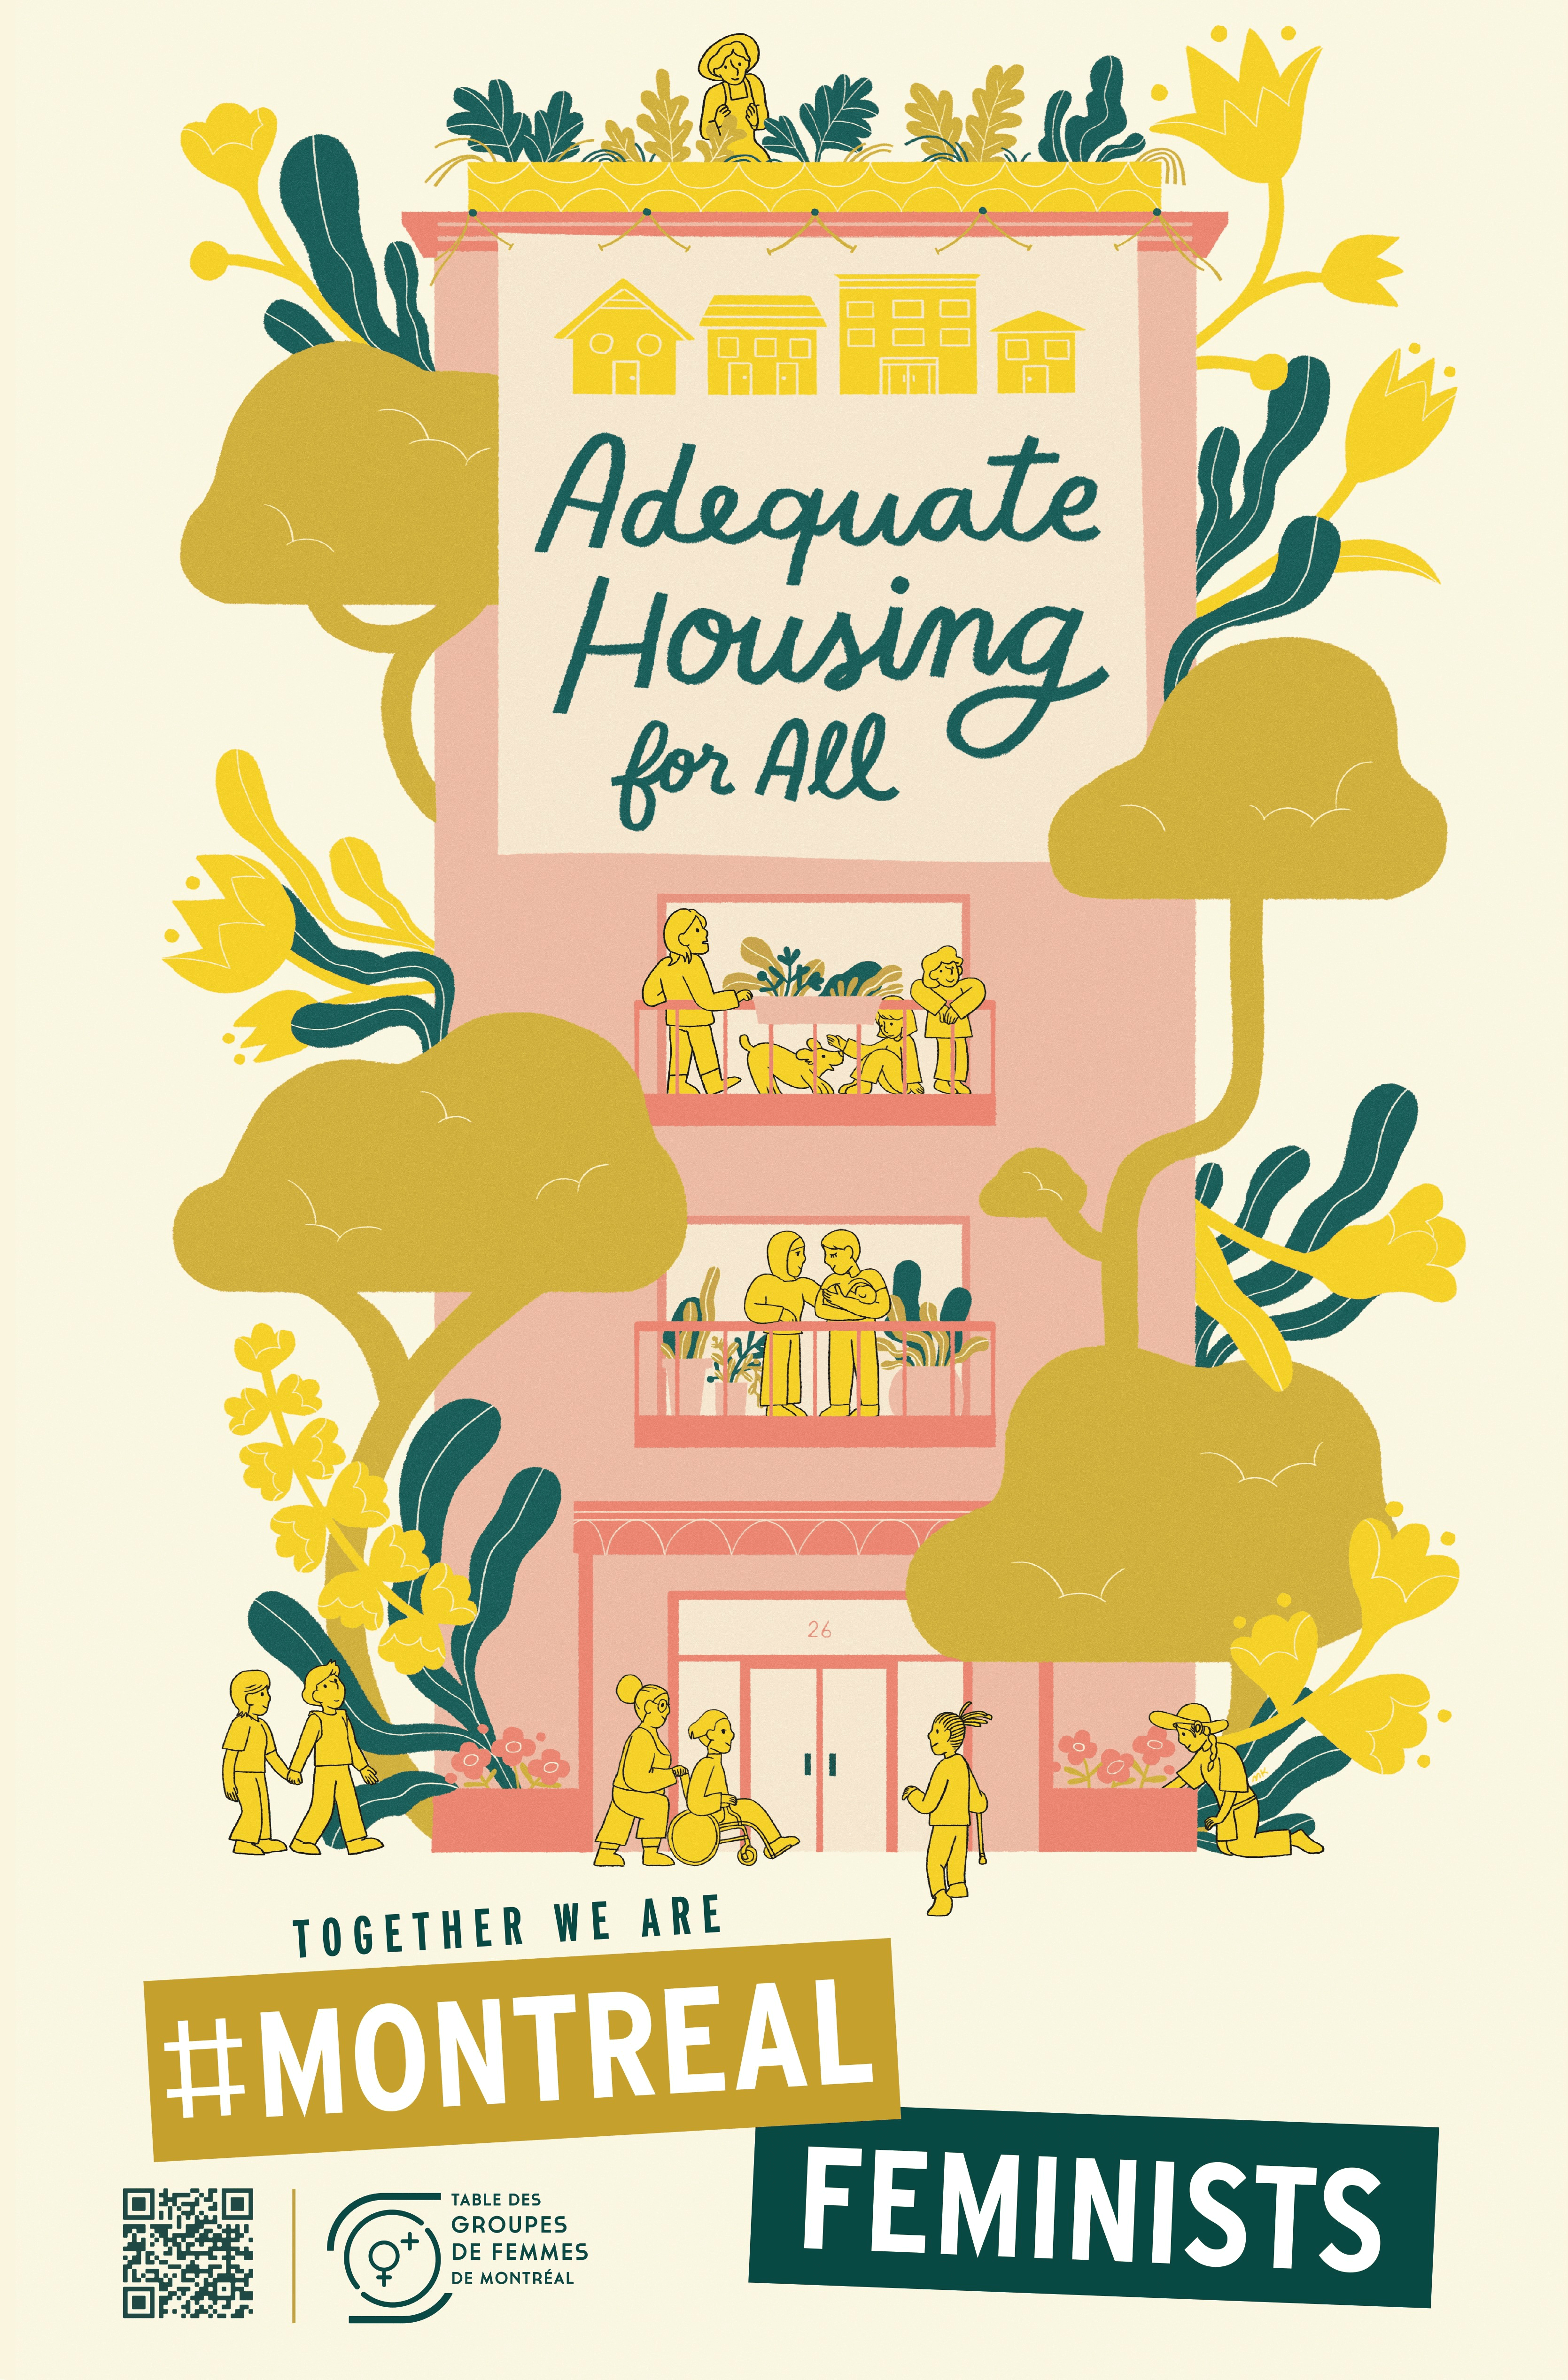 The poster shows a residential building under a radiant sun. Several people enter: a person in a wheelchair, a person using a cane, two young people holding hands. We see a man, a woman and a baby on the first balcony. On the second balcony, there are children and a dog. People are gardening below and on the roof. A banner with the slogan for adequate housing for all is attached to the building.